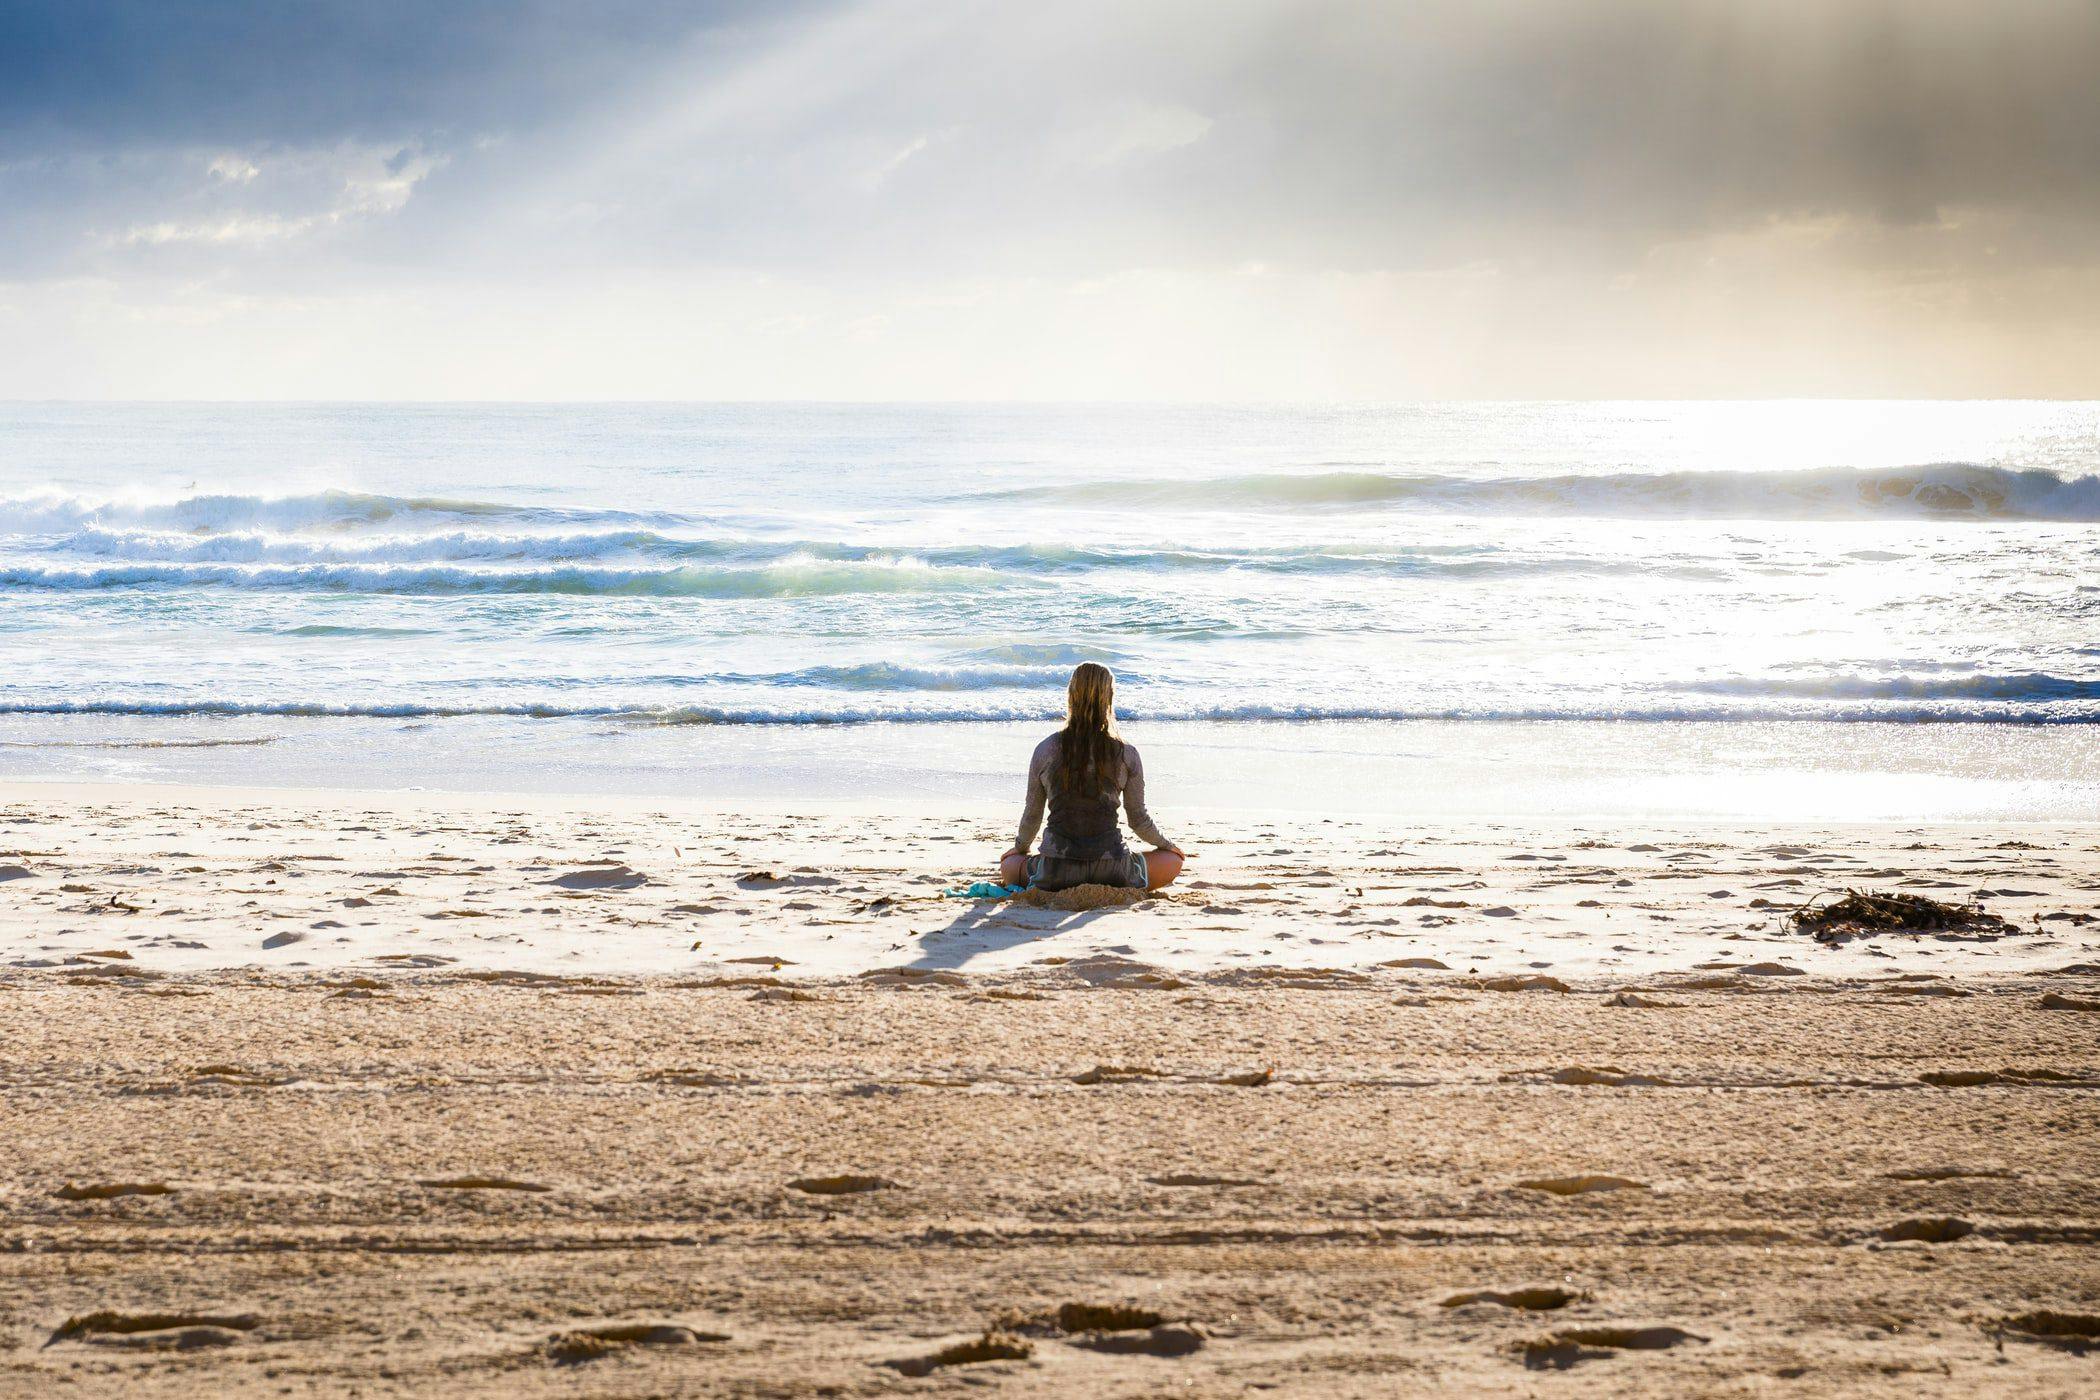 Serene woman in meditation pose on beach with ocean view